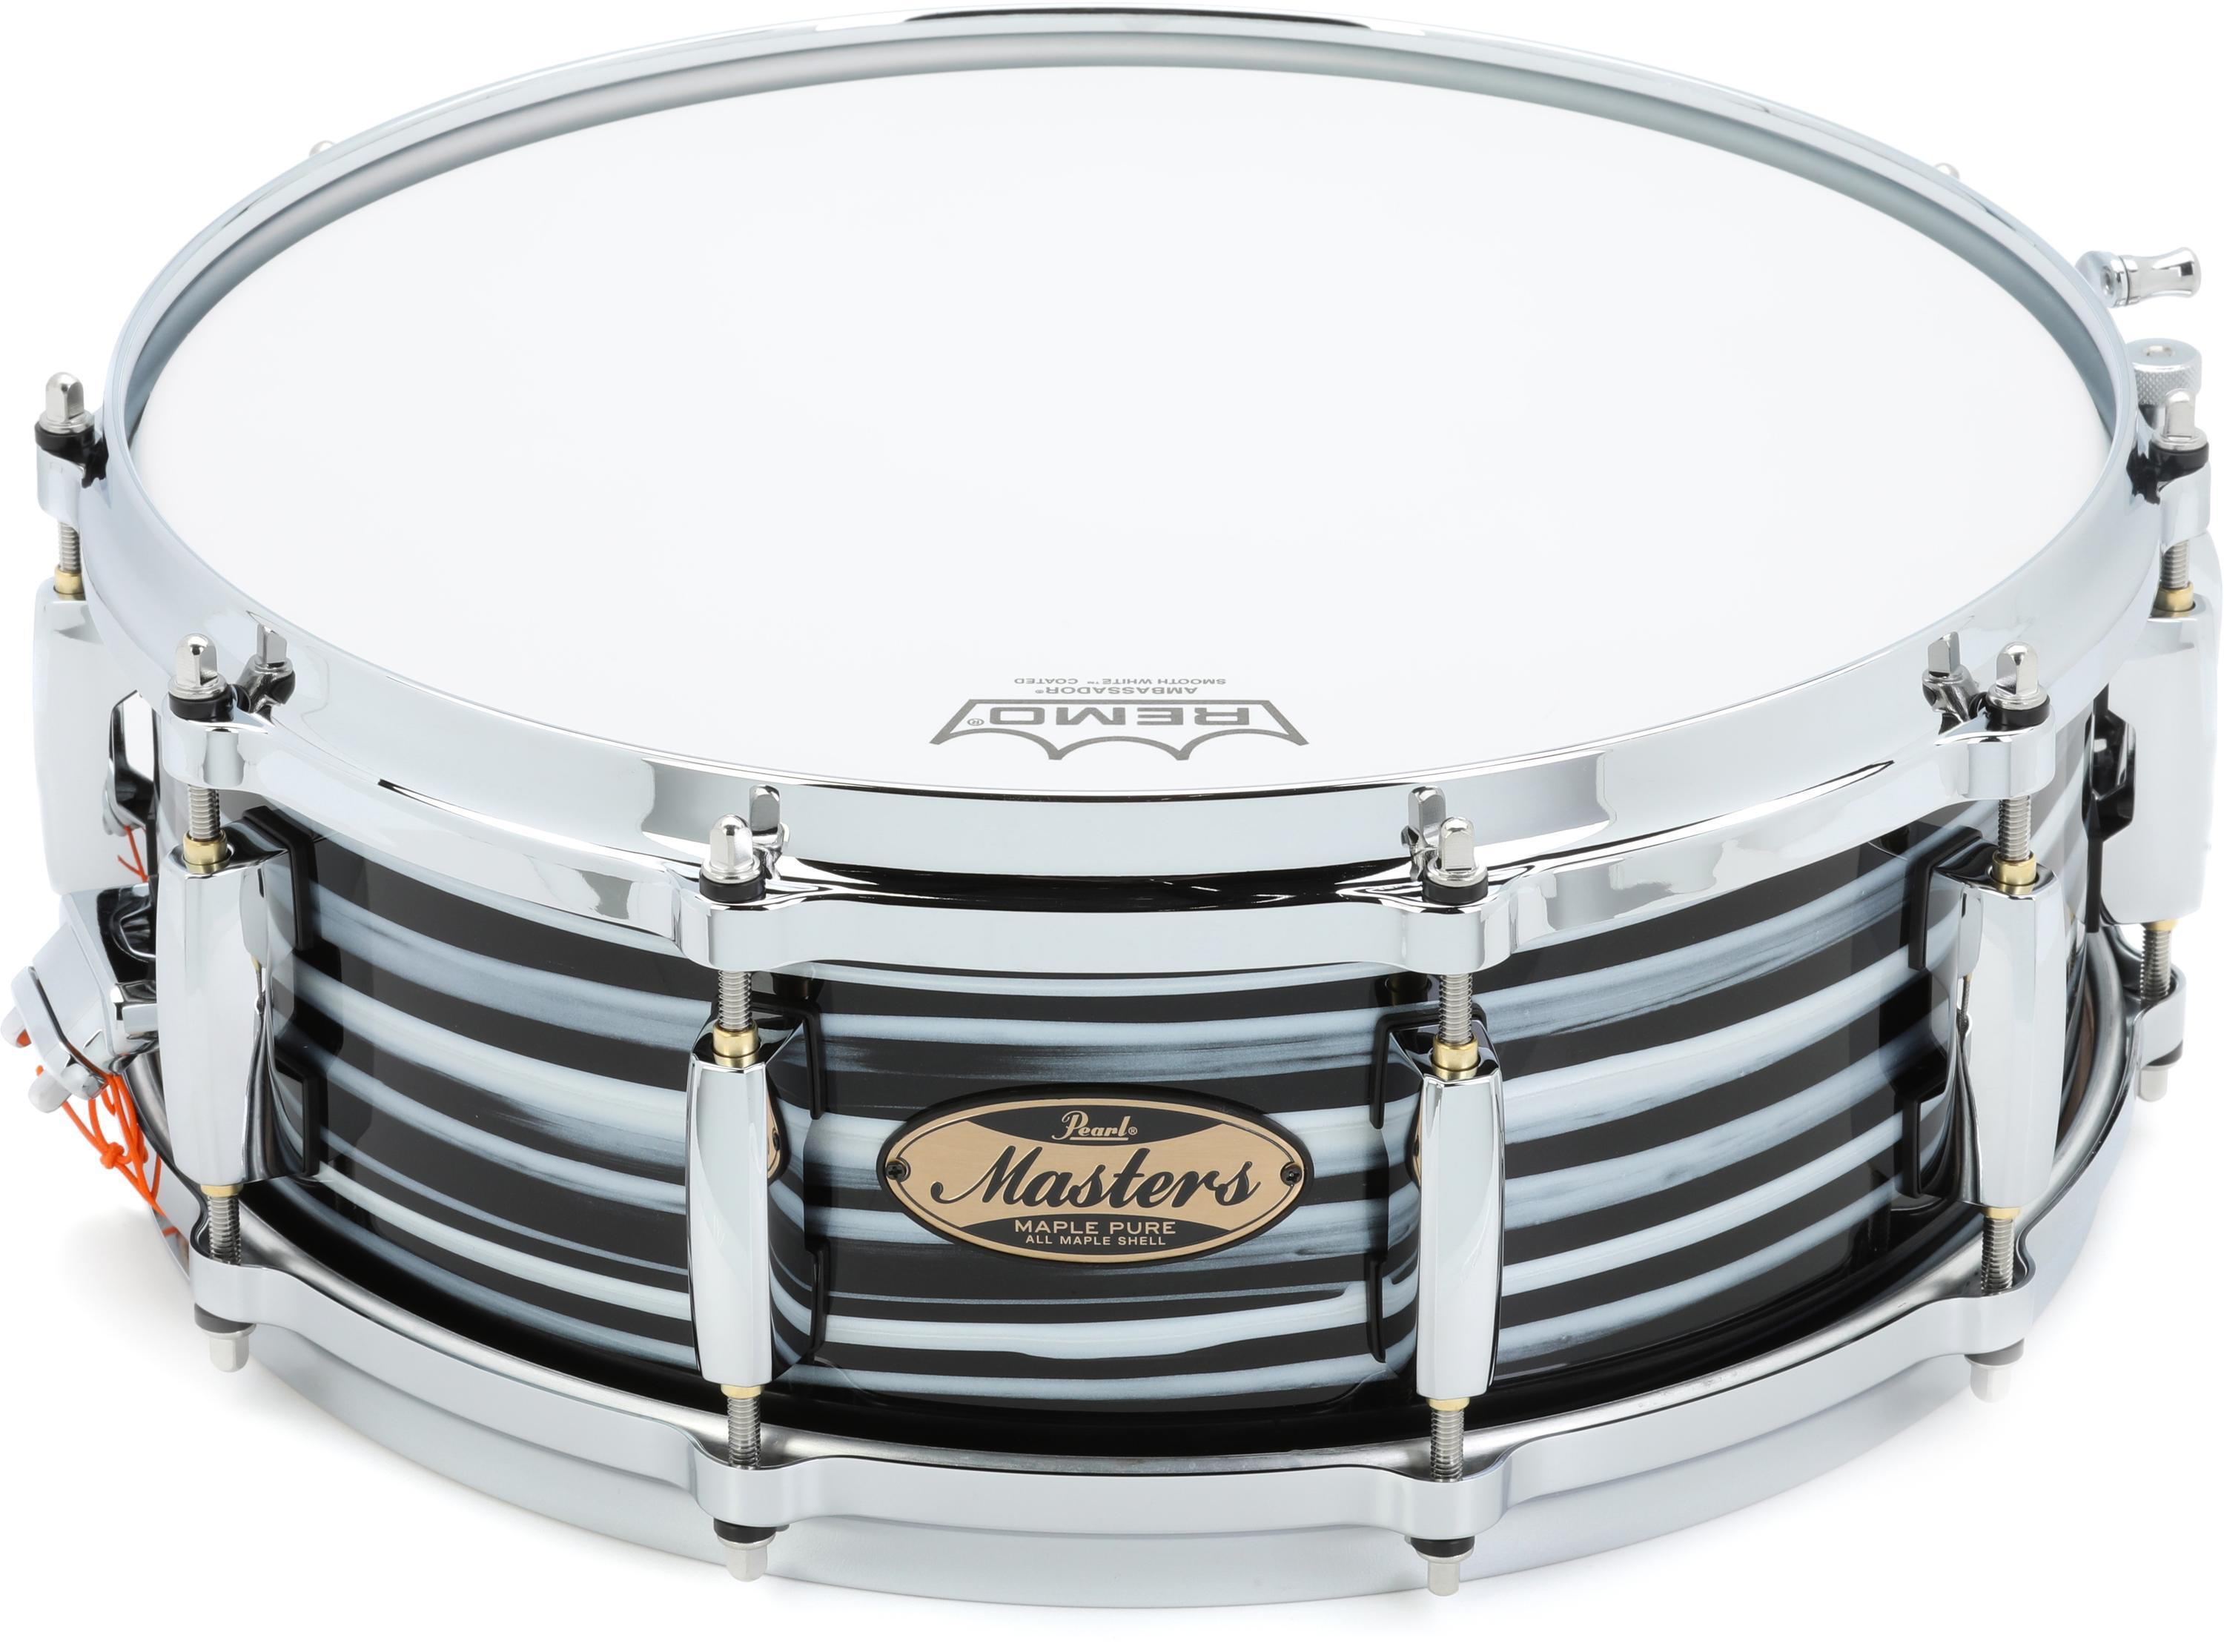 Masters Maple Pure Snare Drum - 5 x 14-inch - Black Oyster Swirl